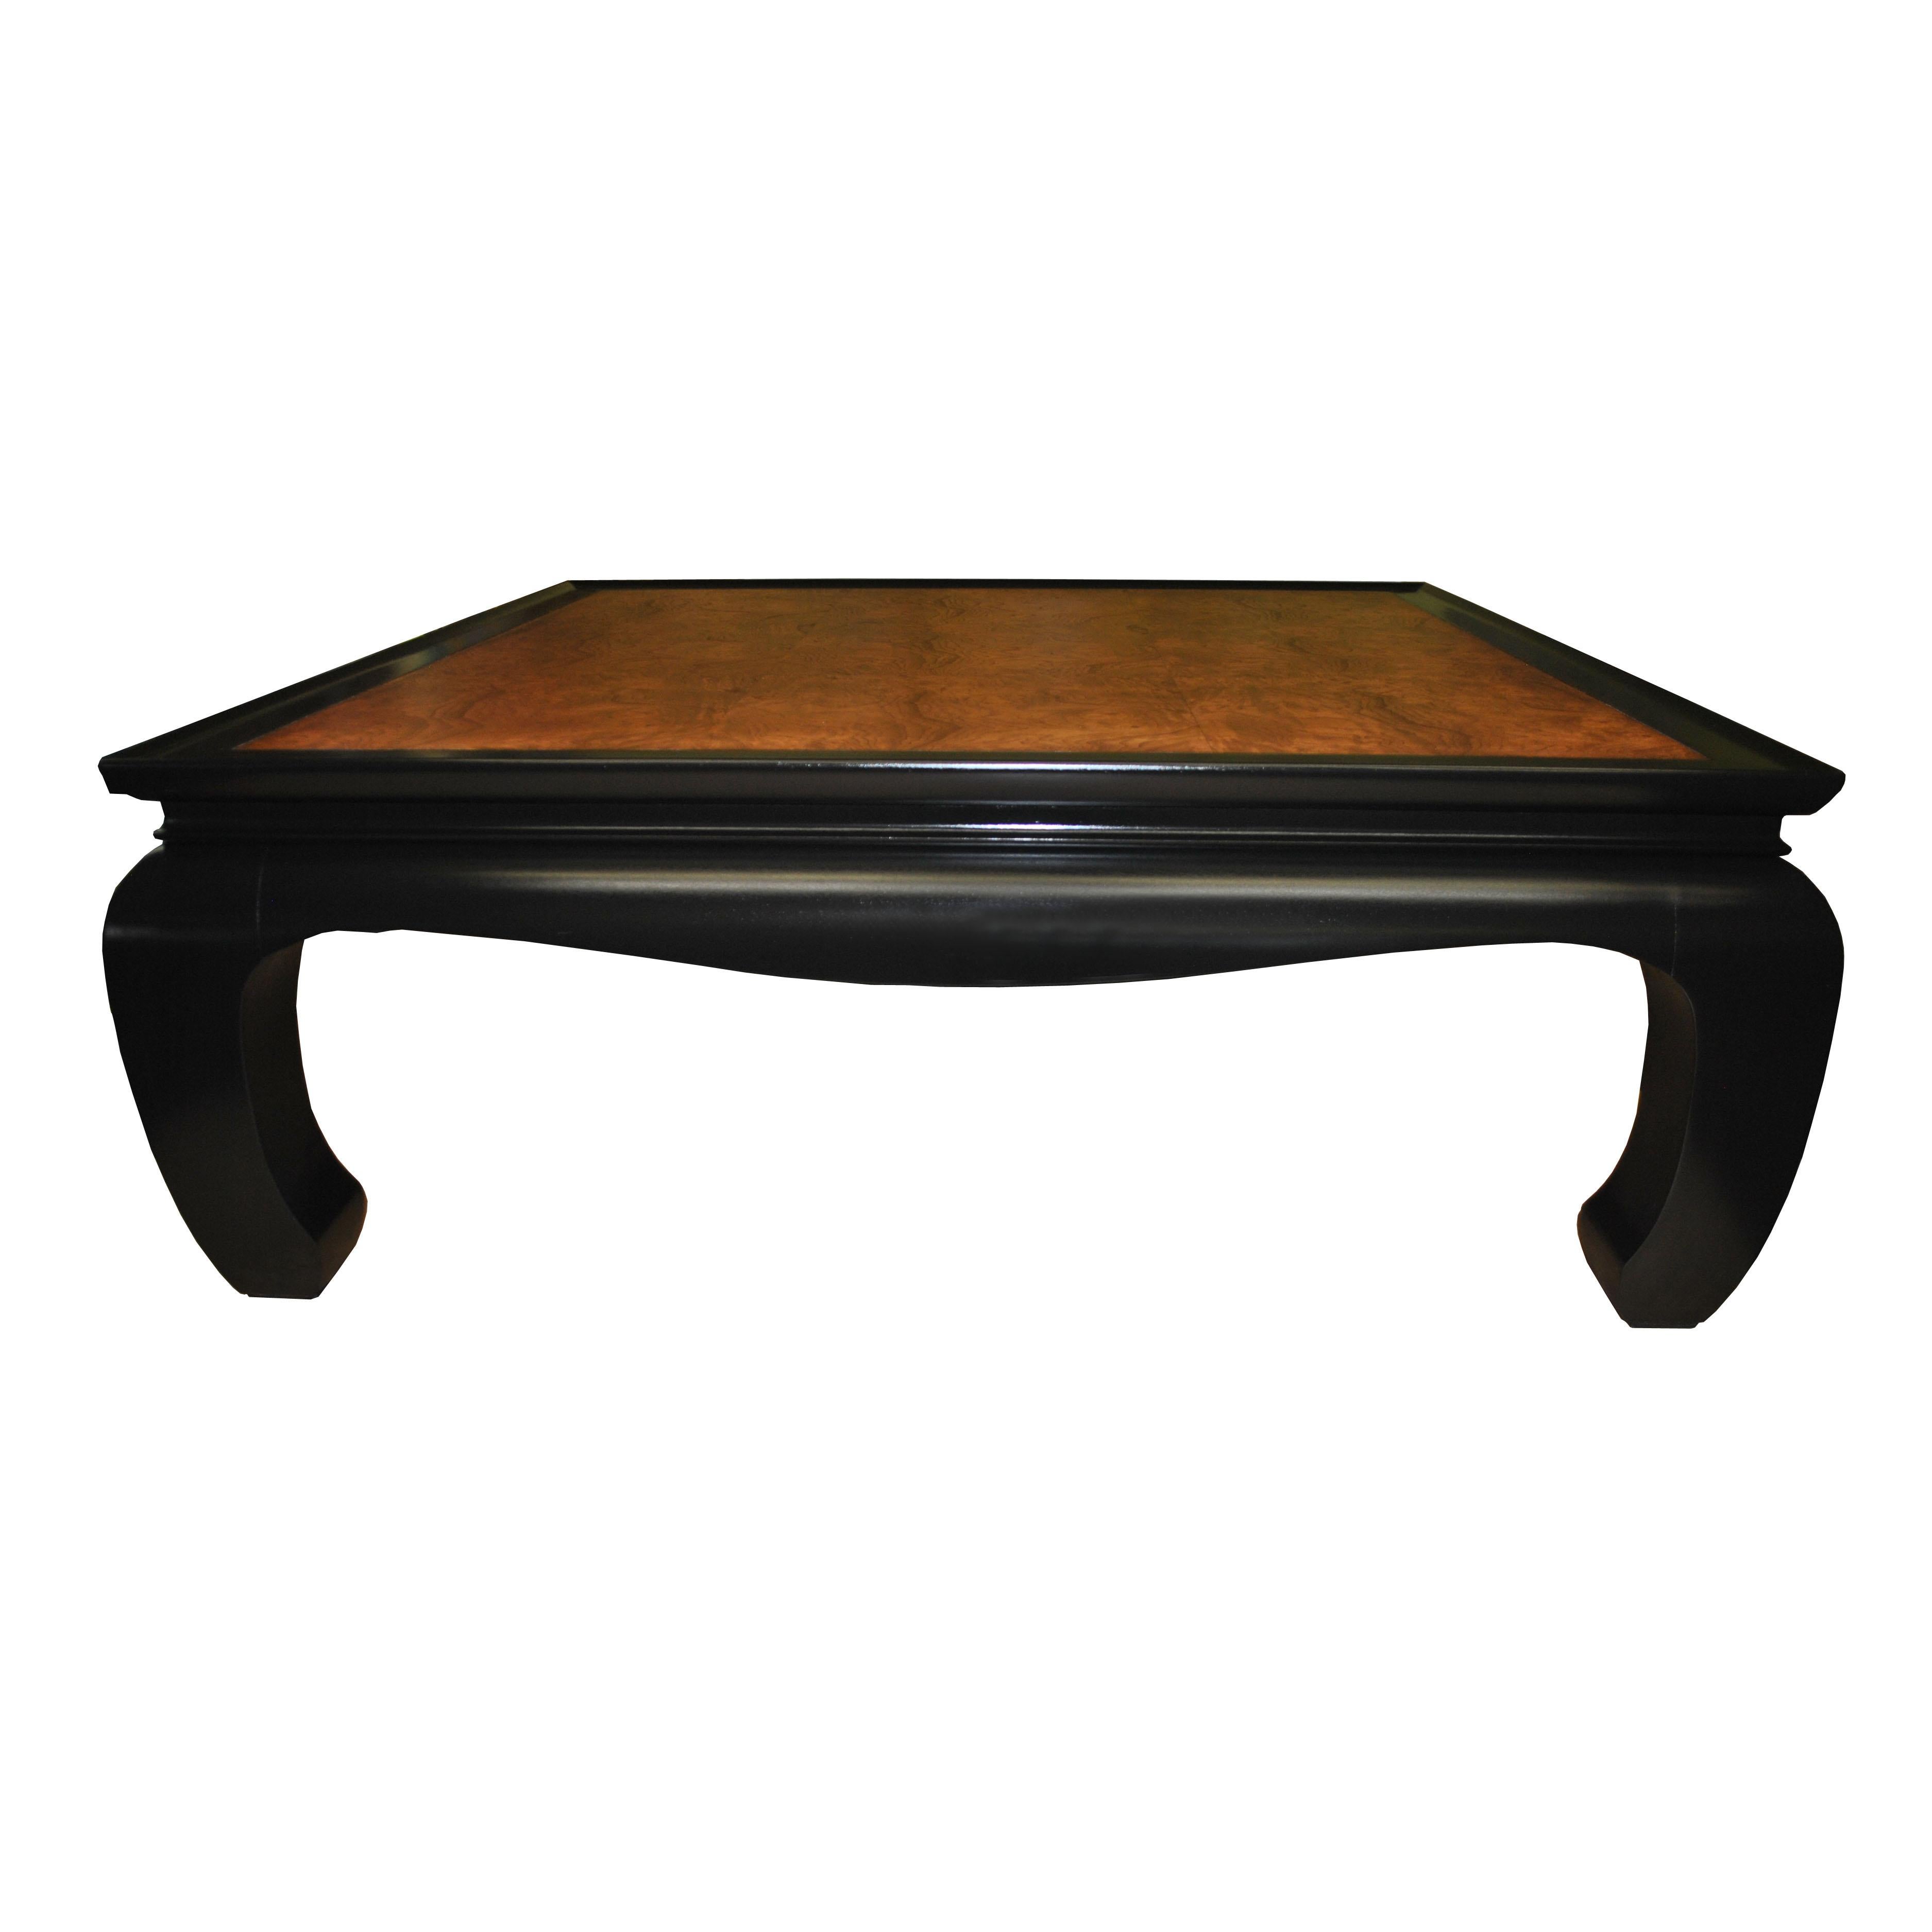 Century Furniture

Vintage midcentury Chin Hua burl coffee table 

A chinoiserie coffee table from the Chin Hua collection by Century Furniture. The table features a stunning burl wood grain and an ebonized base. Restored.
 